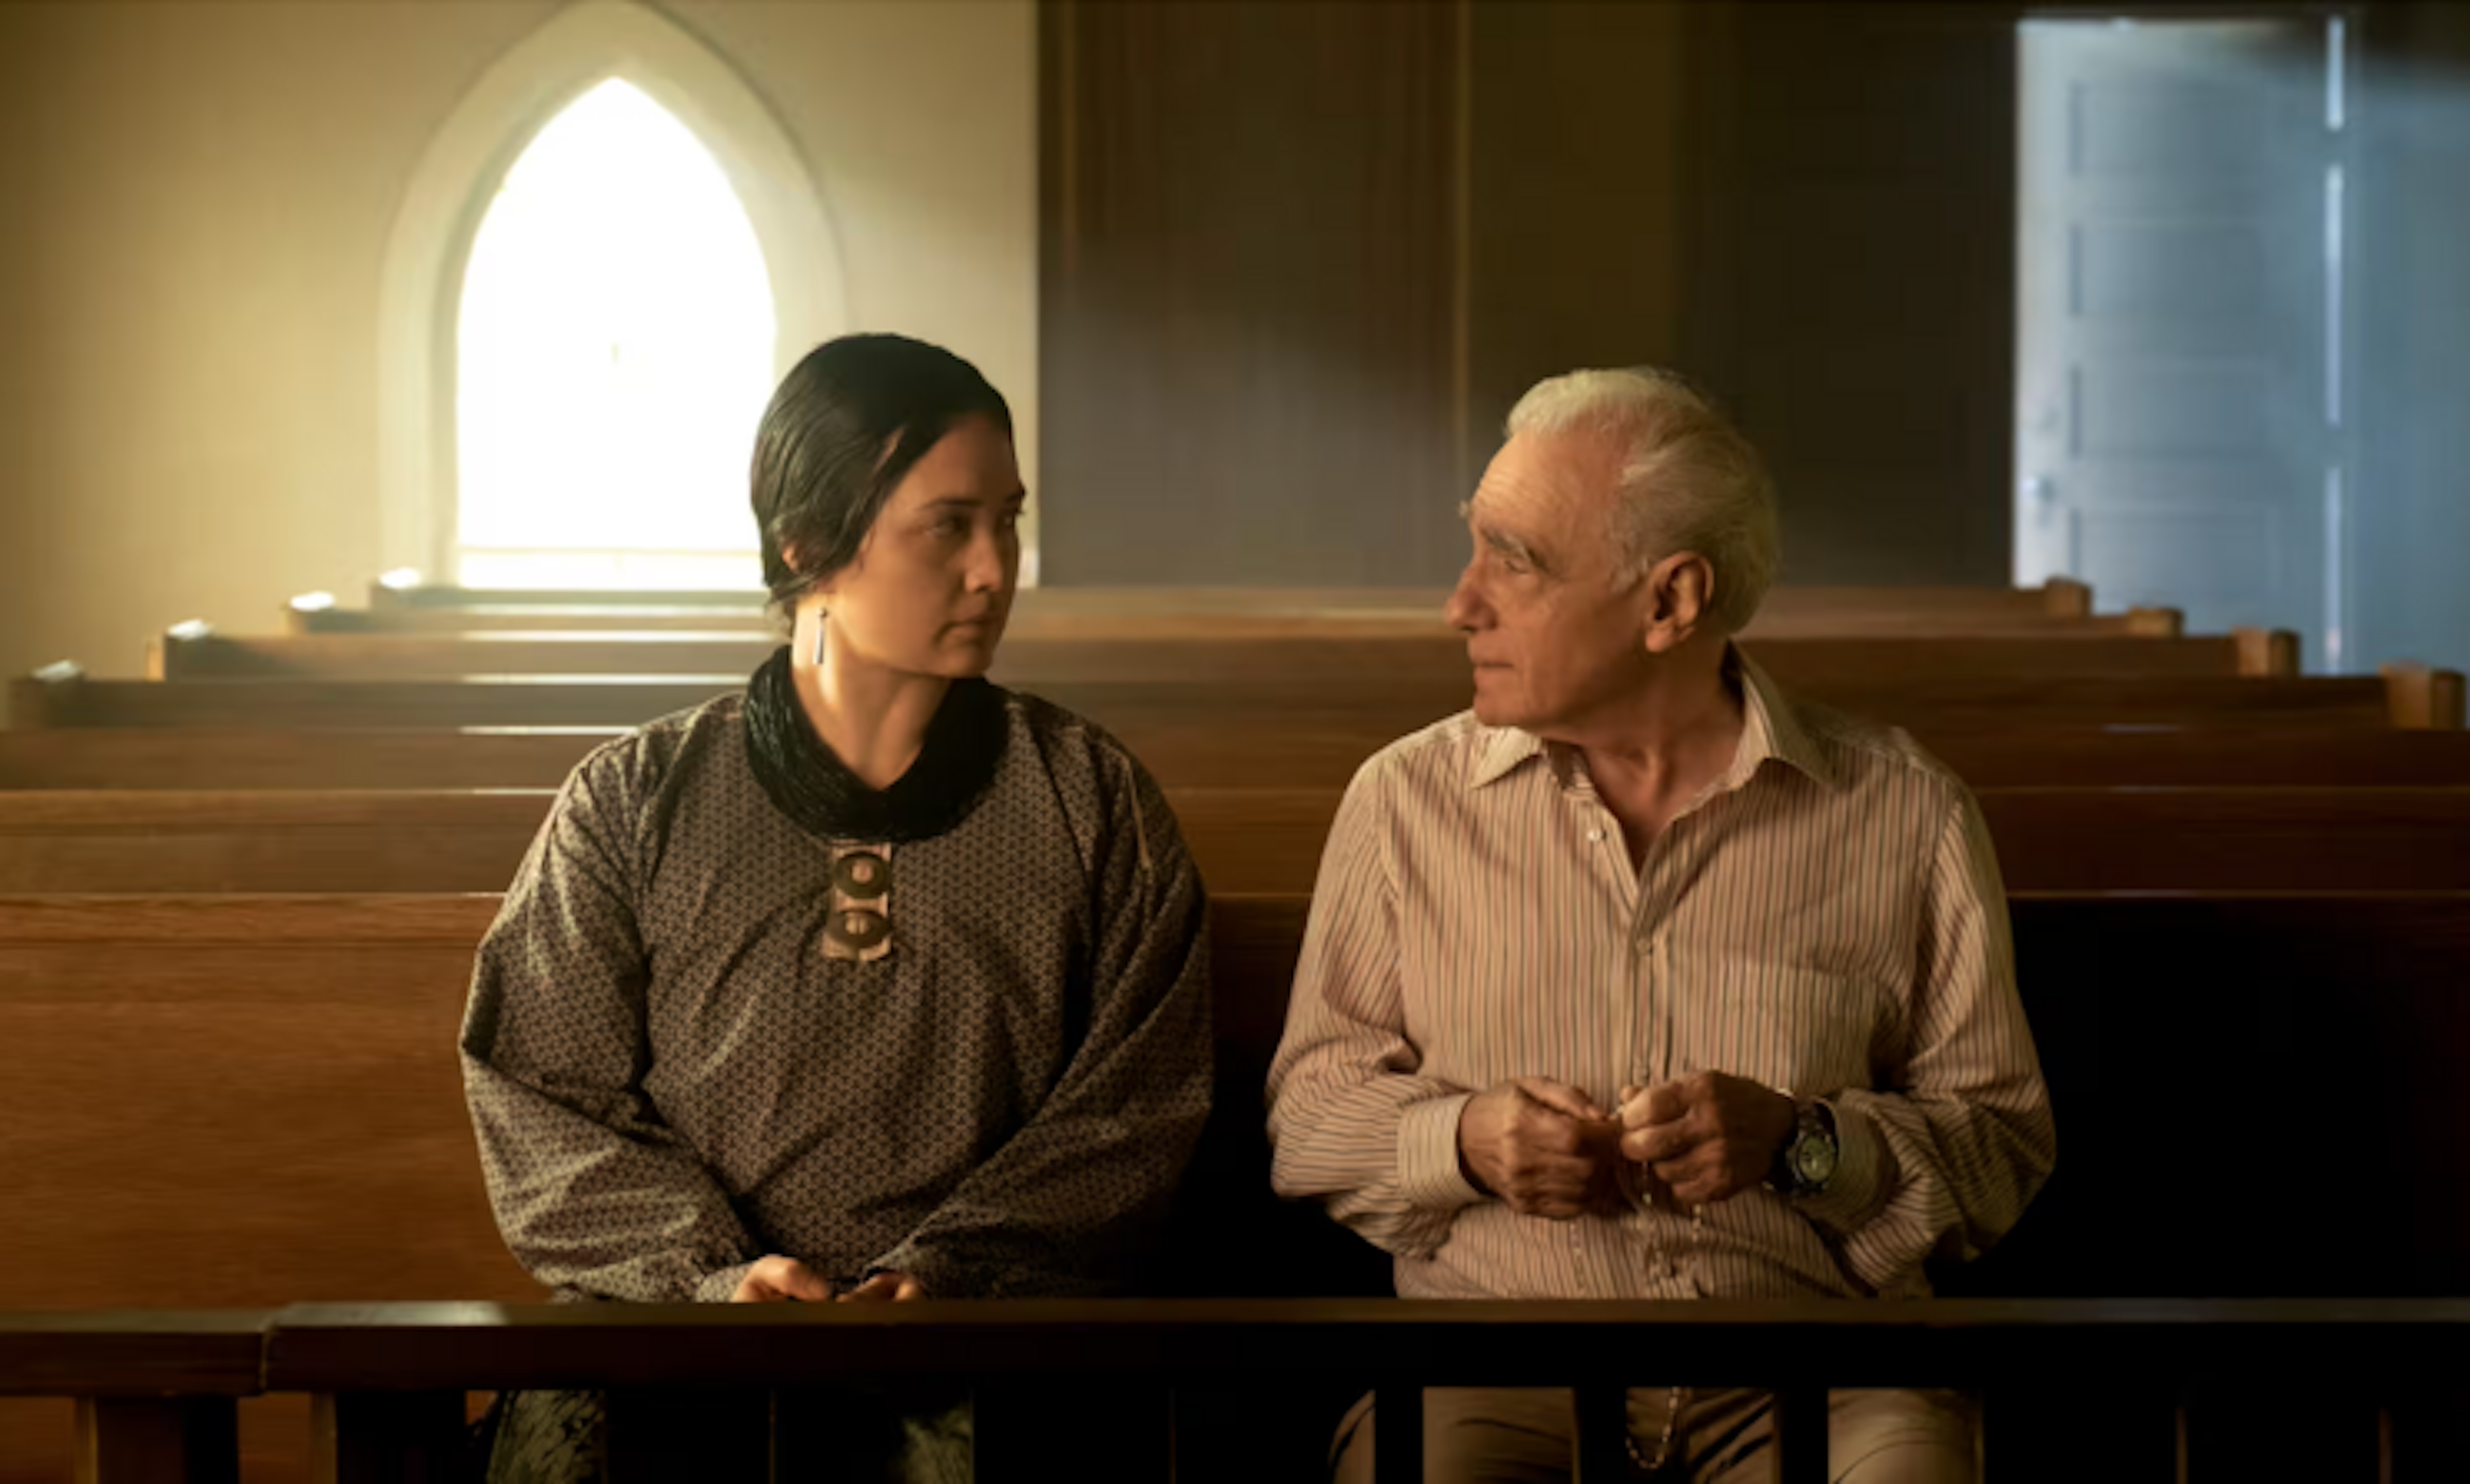 A dark-haired woman in a dark dress and a white-haired man in a button-down shirt sit looking at each other seriously in a church pew.